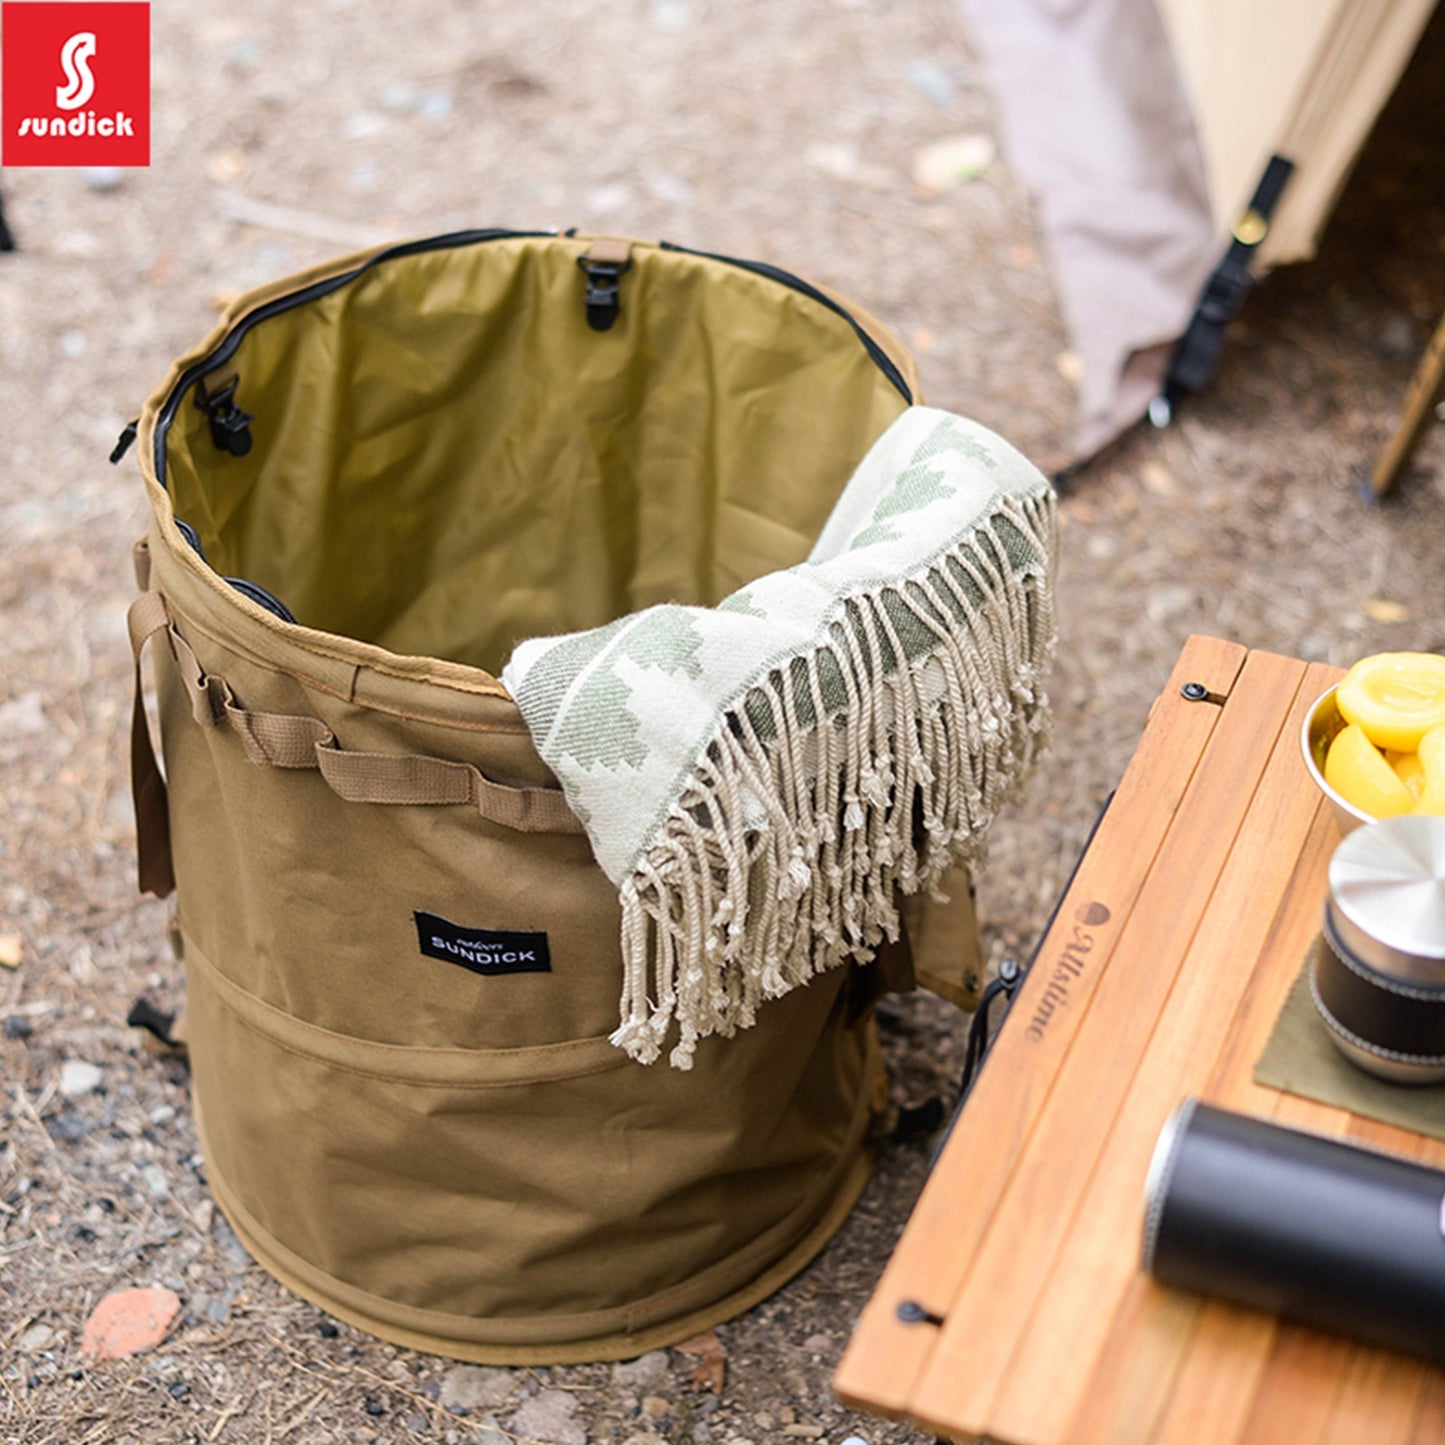 Collapsible / Folding Clothes or Sundry Storage Bag For Camping, Hiking, Fishing, Hunting, or Travel